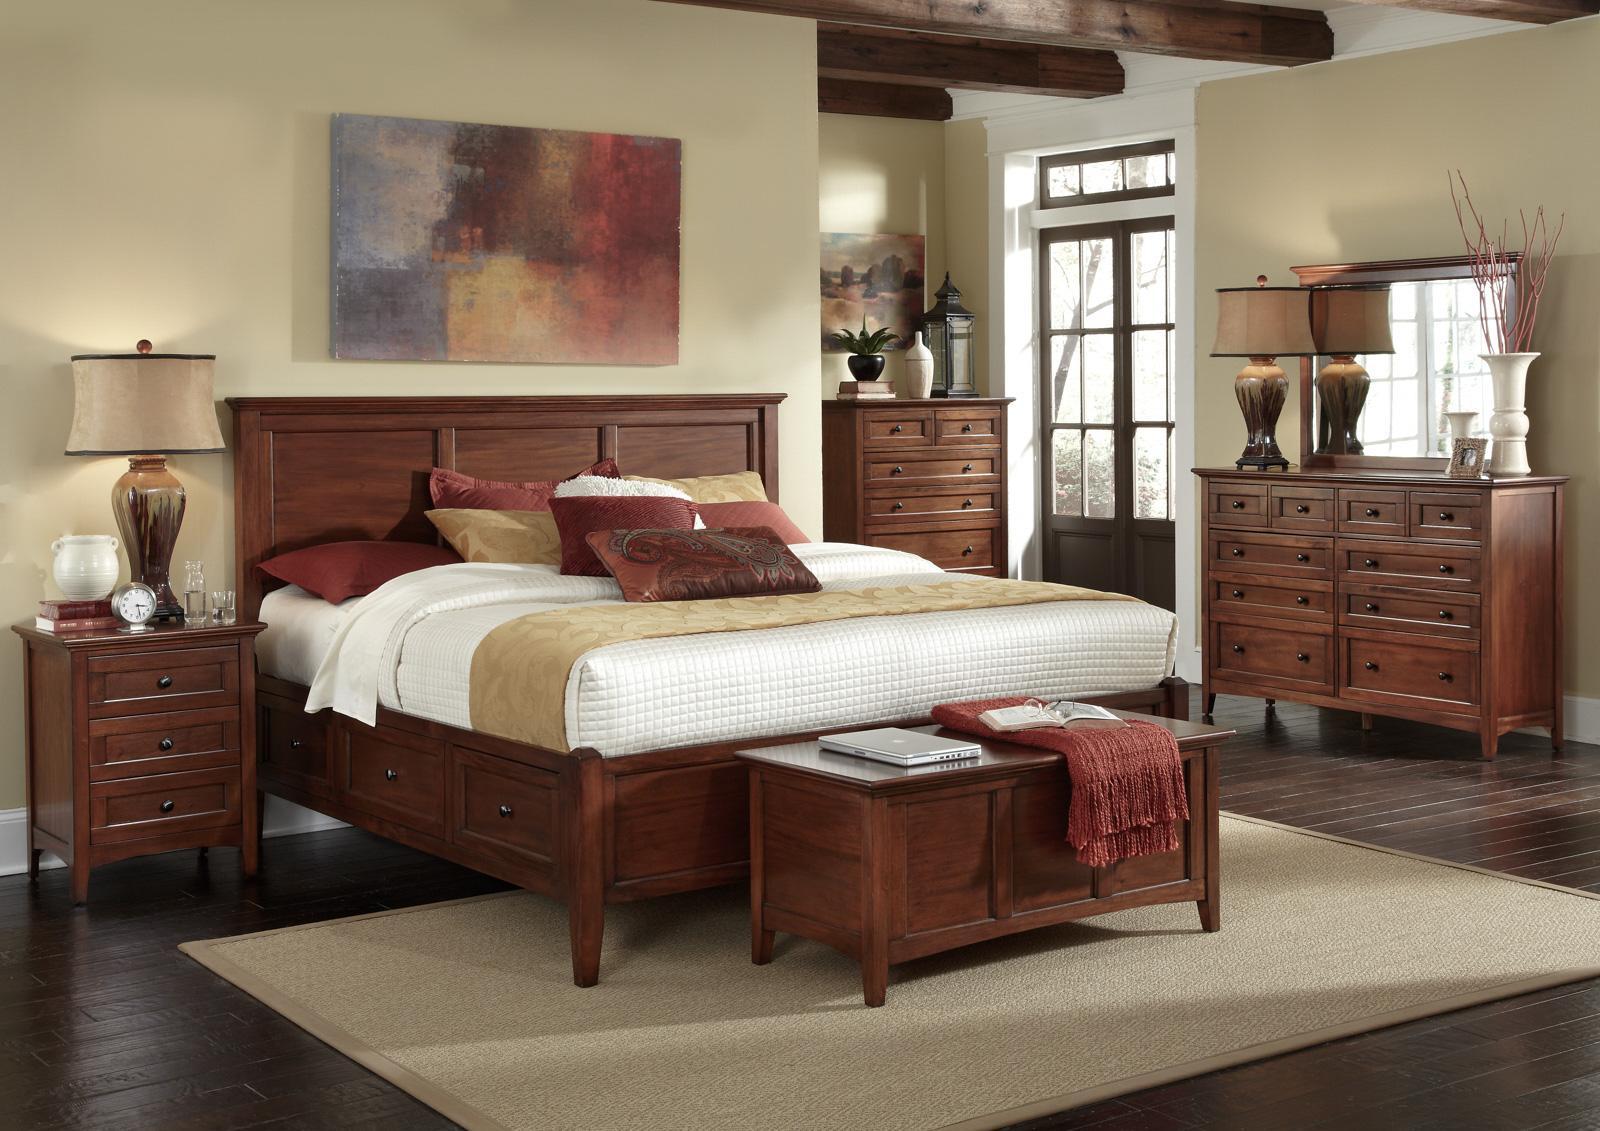 

    
Traditional Queen Storage Bedroom Set 4Pcs WSLCB5091 A-America Westlake
